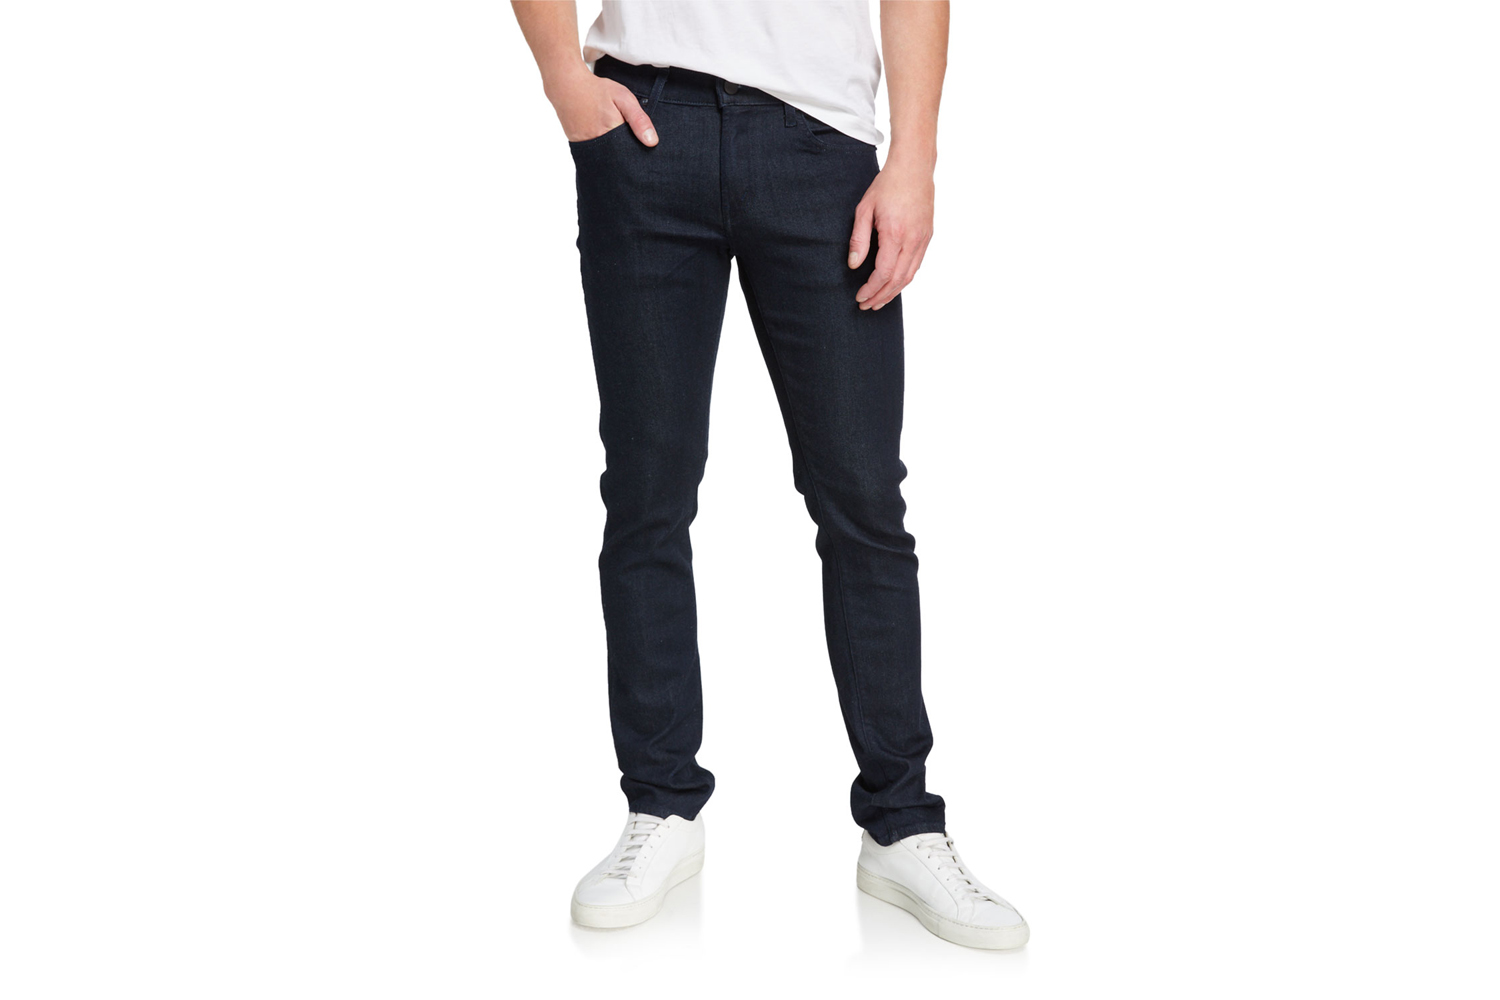 Tyler Slim-Fit Seriously Soft Jeans
J Brand